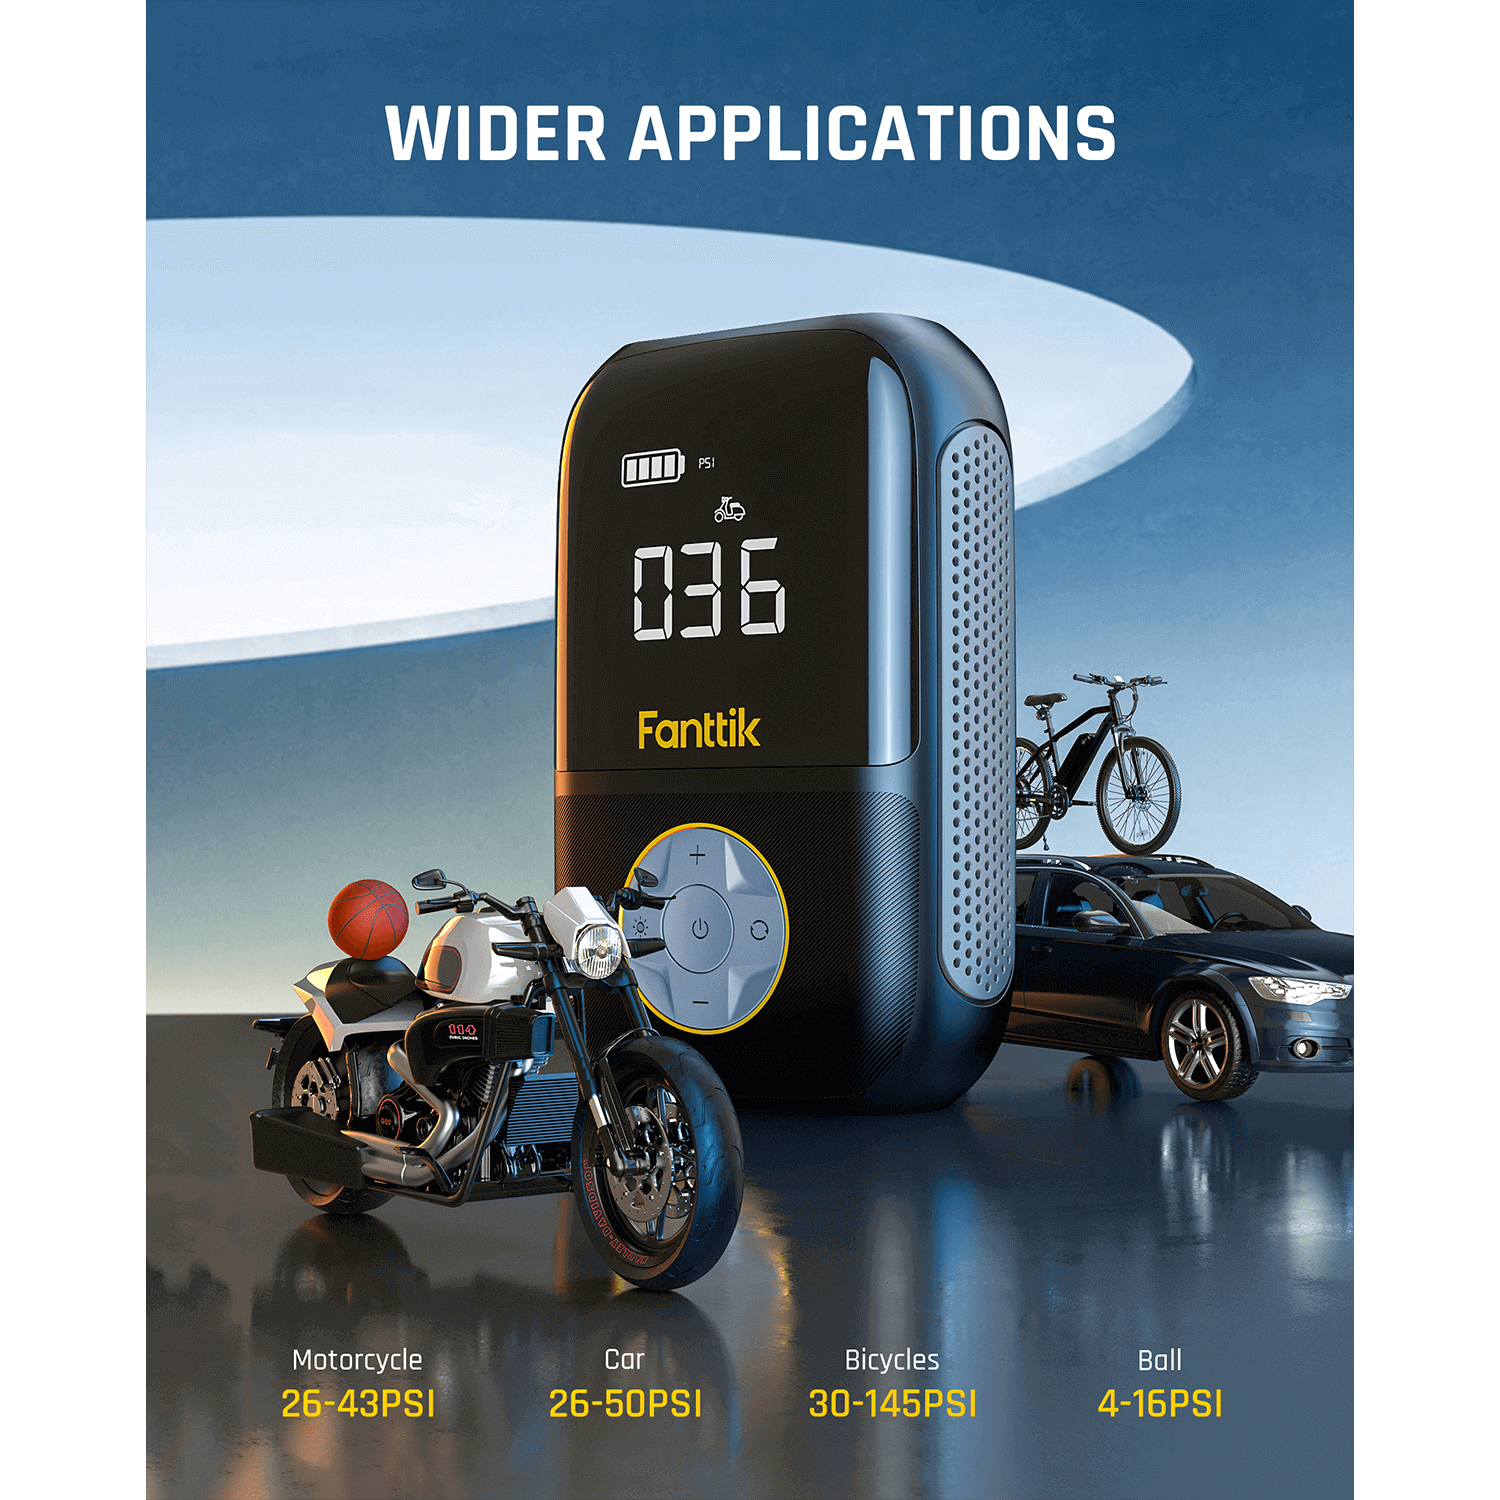 Fanttik X8 Portable Tire Inflator and X8 APEX Tire Inflator